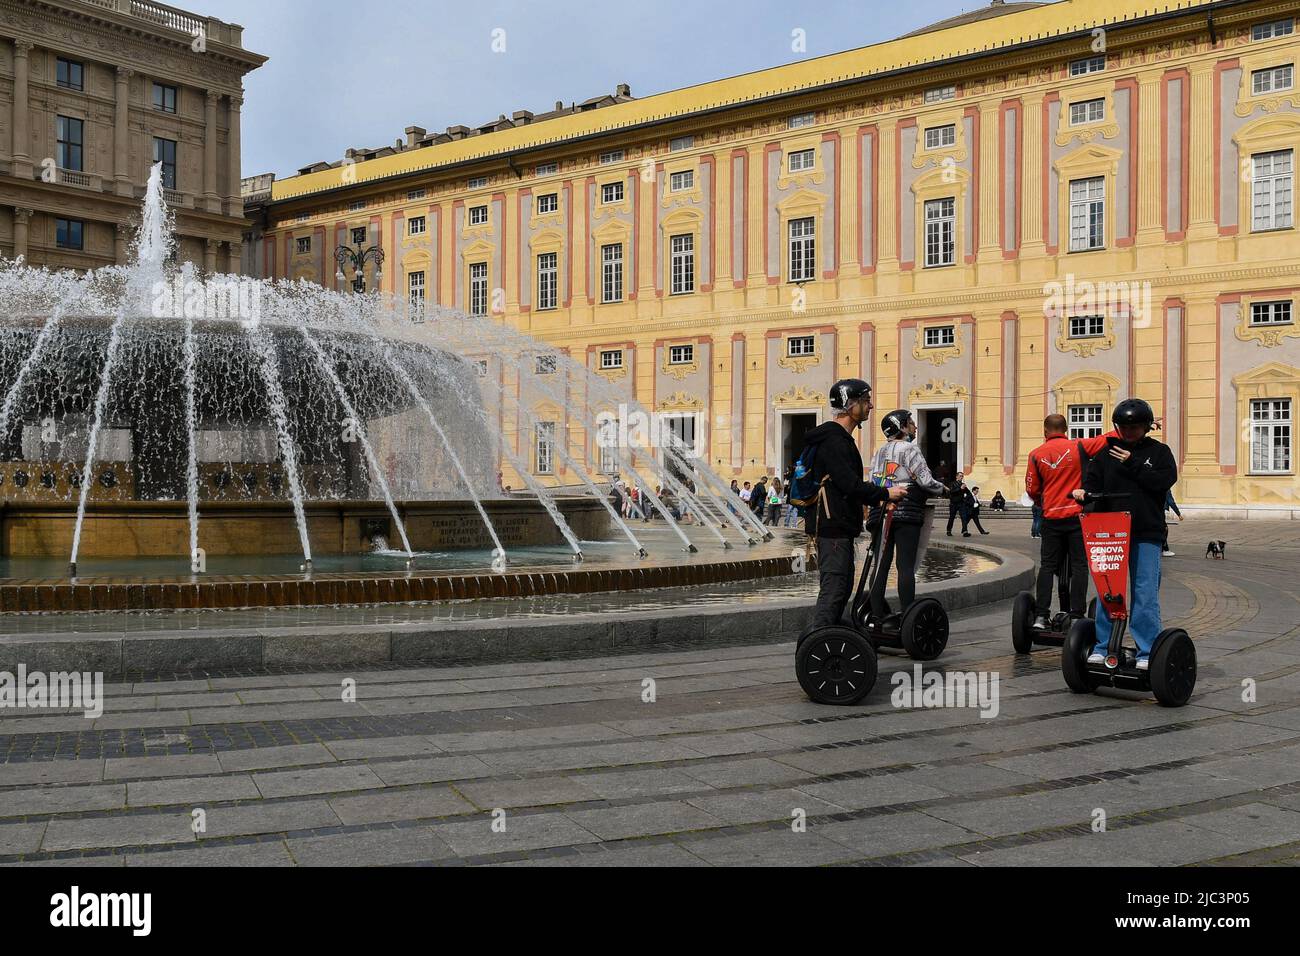 Tourists riding Segway electric vehicles next to the fountain in Piazza De Ferrari square with the Doge's Palace in the background, Genoa, Liguria Stock Photo